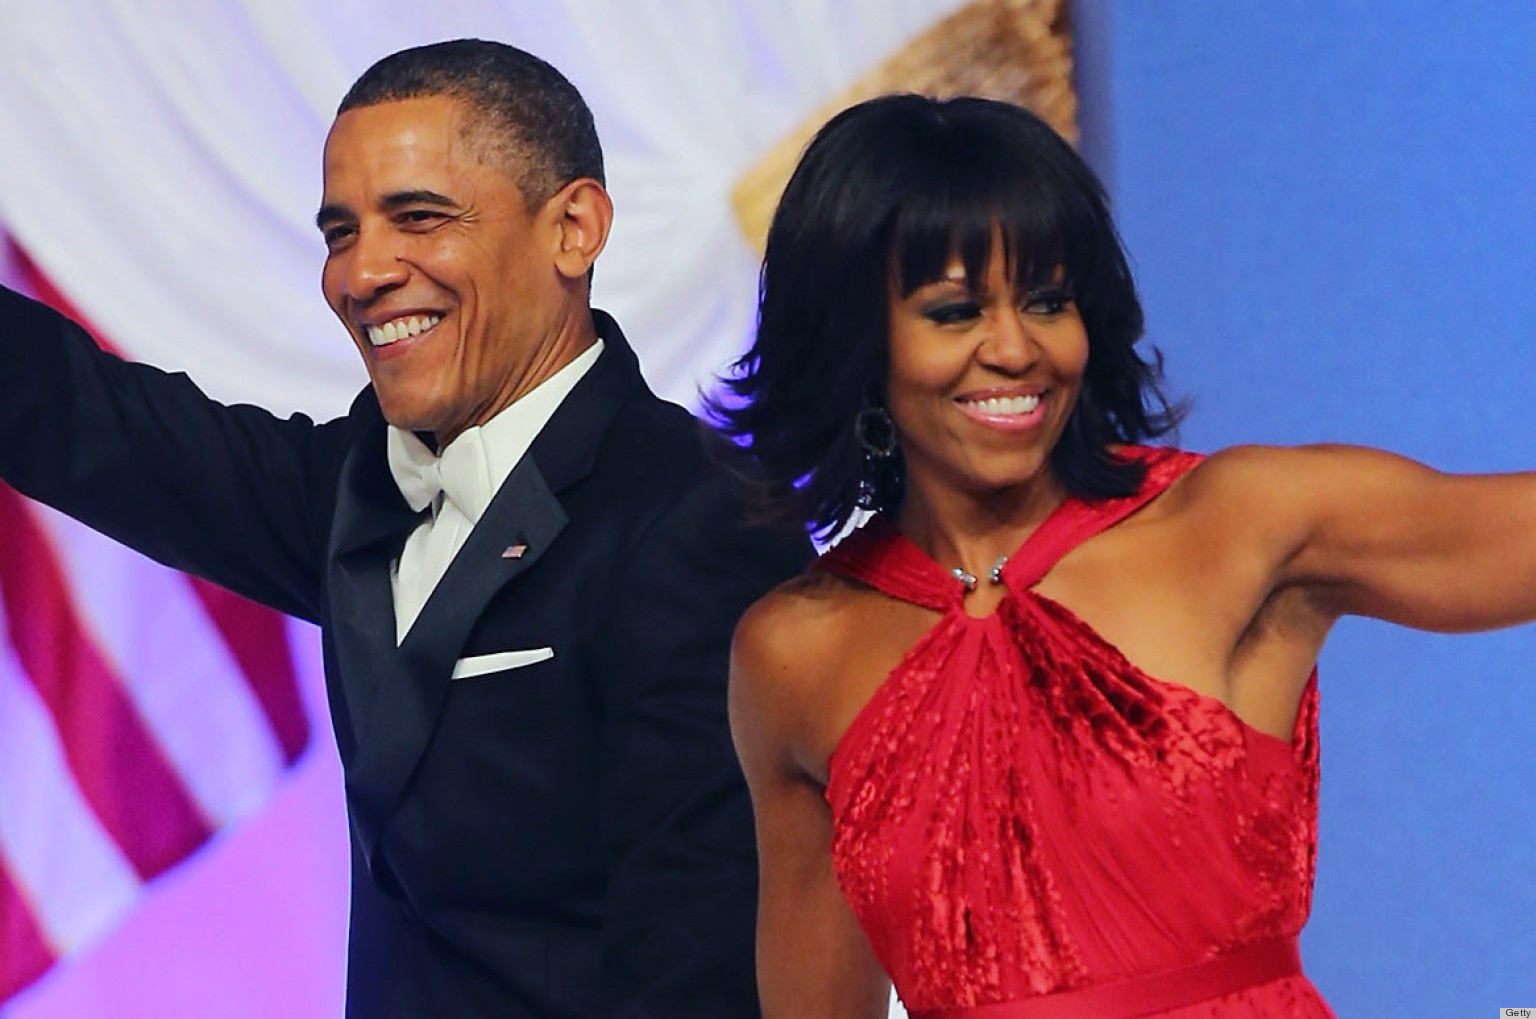 Michelle Obama Dress At The Inauguration Ball 2013: Jason Wu Red Gown! (PHOTOS)1536 x 1019